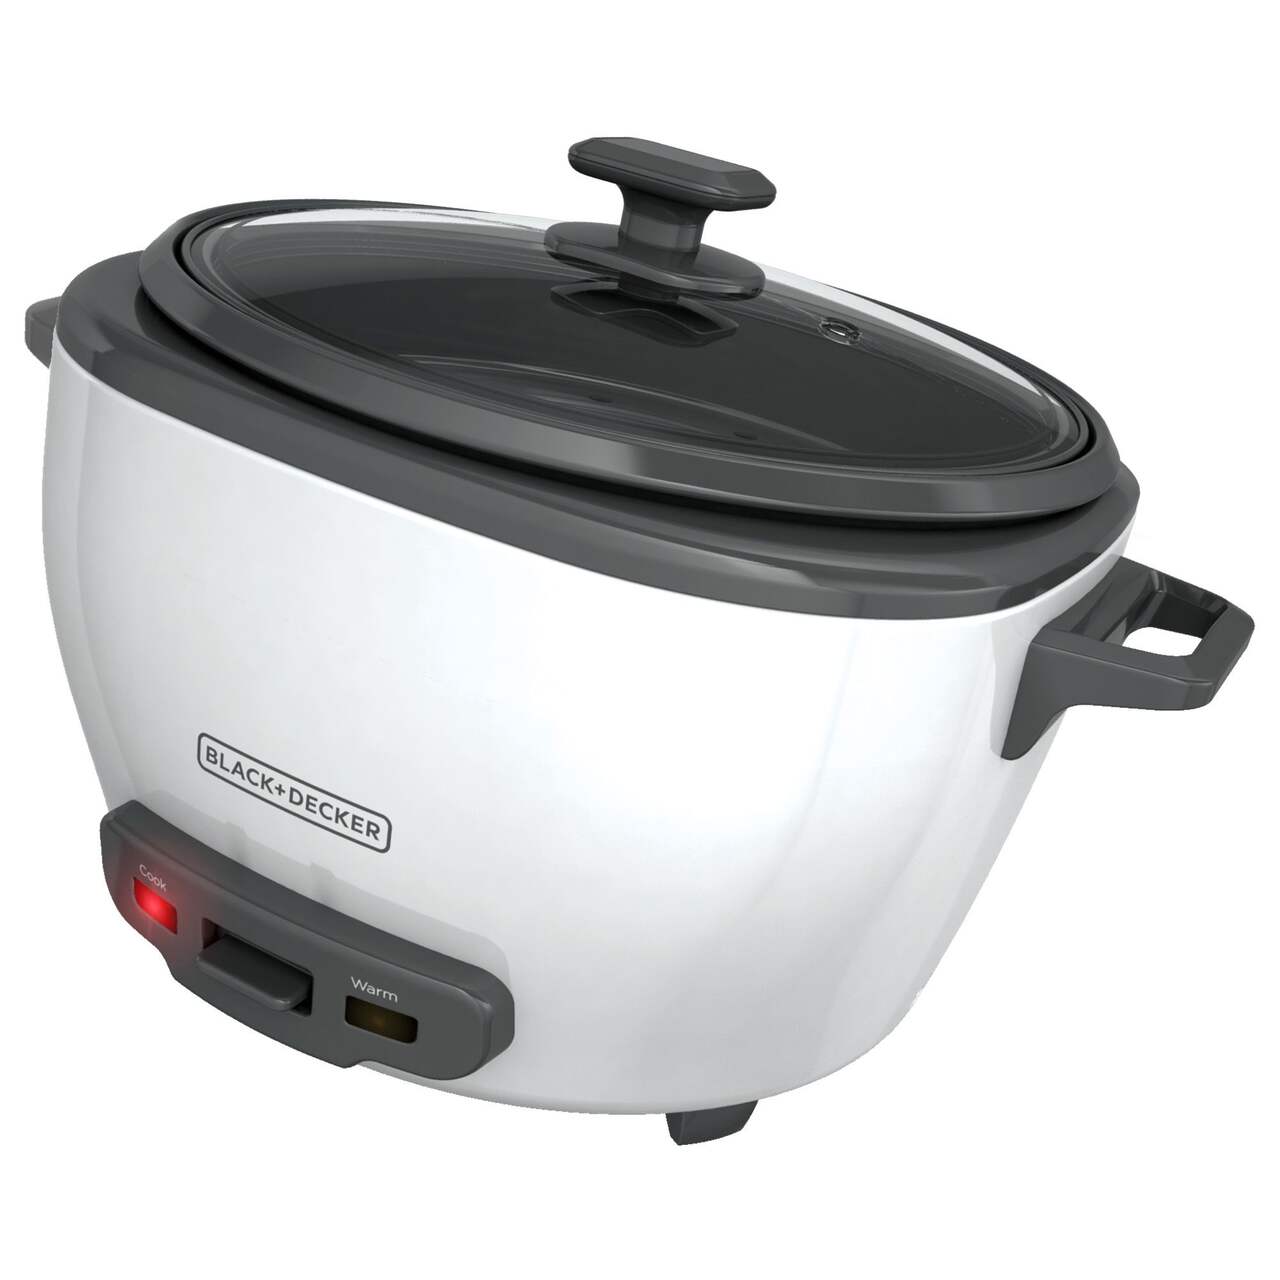 Black & Decker rice cooker and candy melter